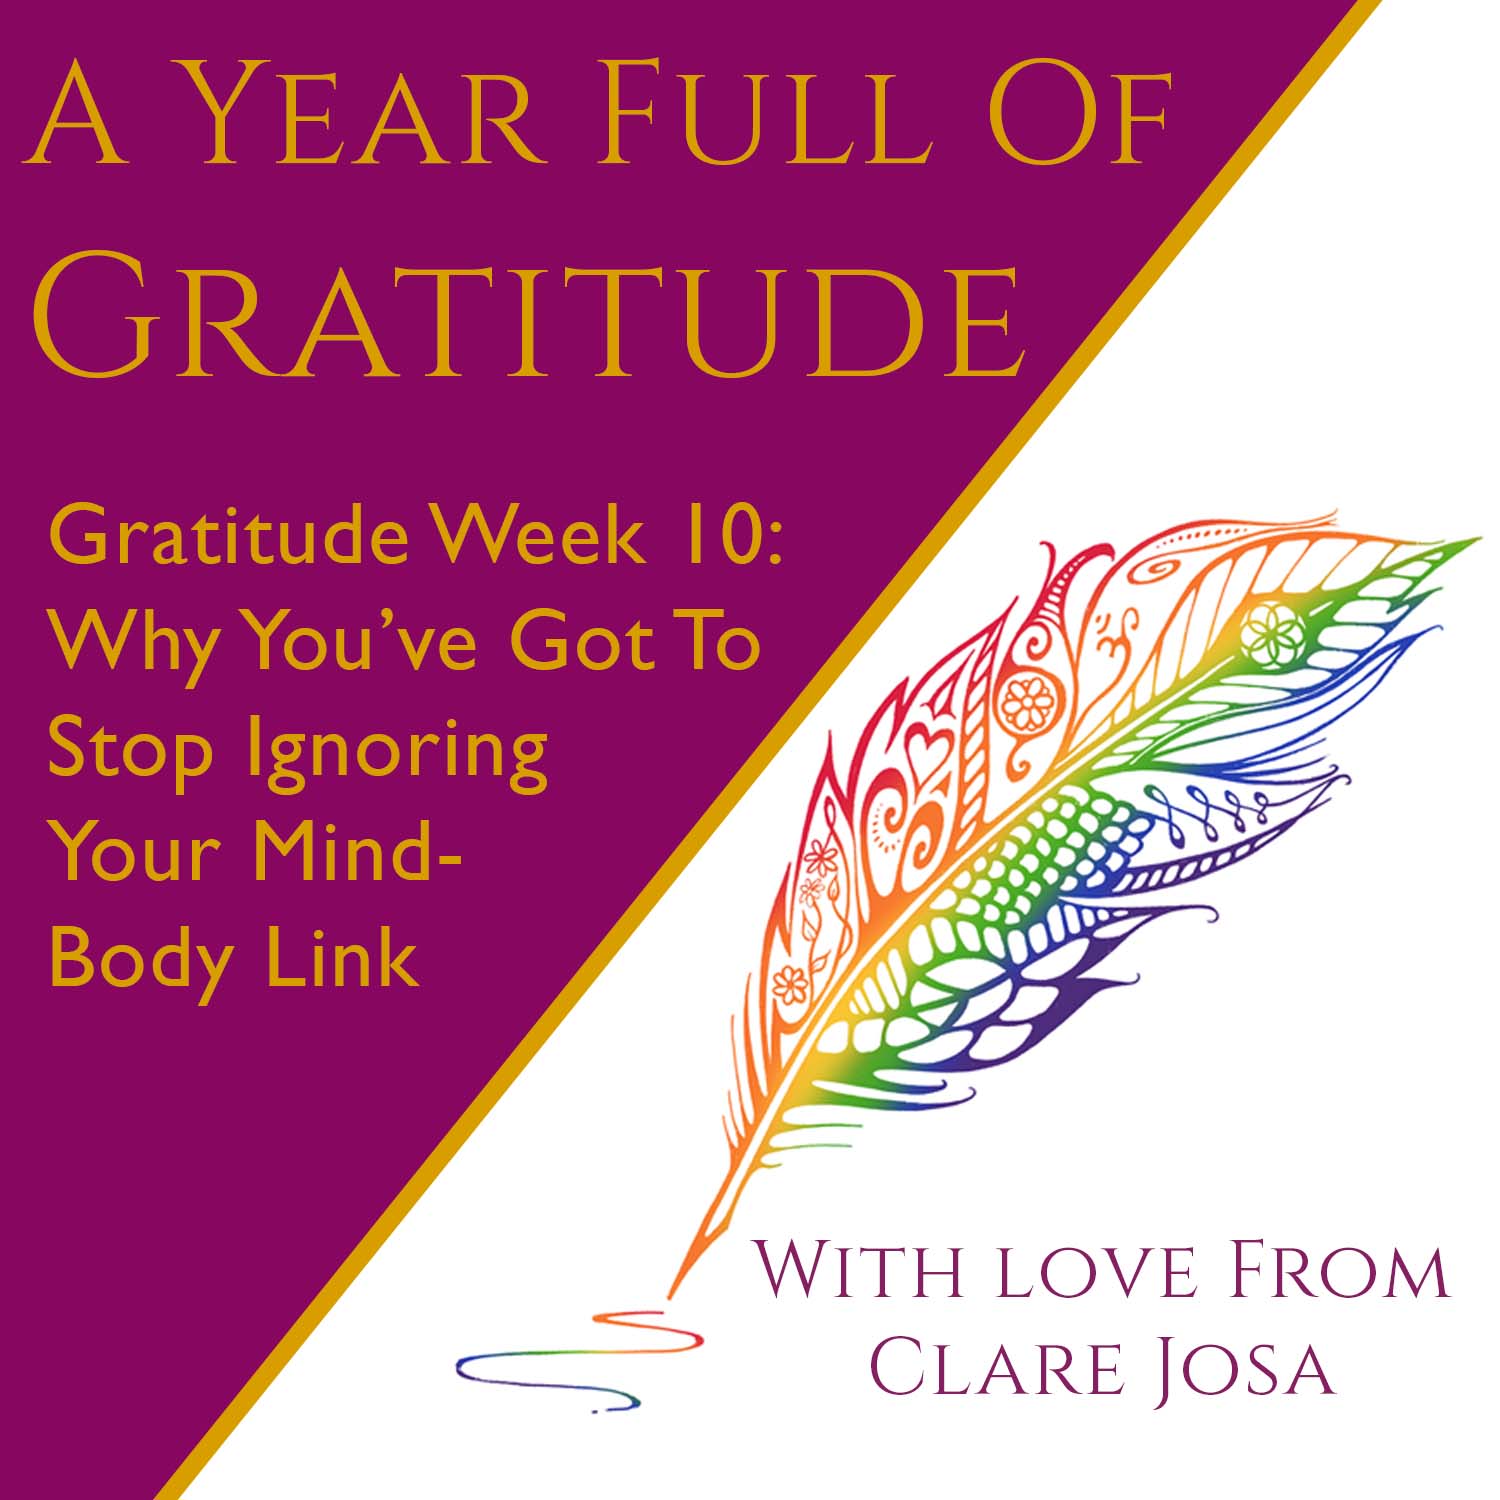 Gratitude Week 10: Why you've got to stop ignoring your mind-body link